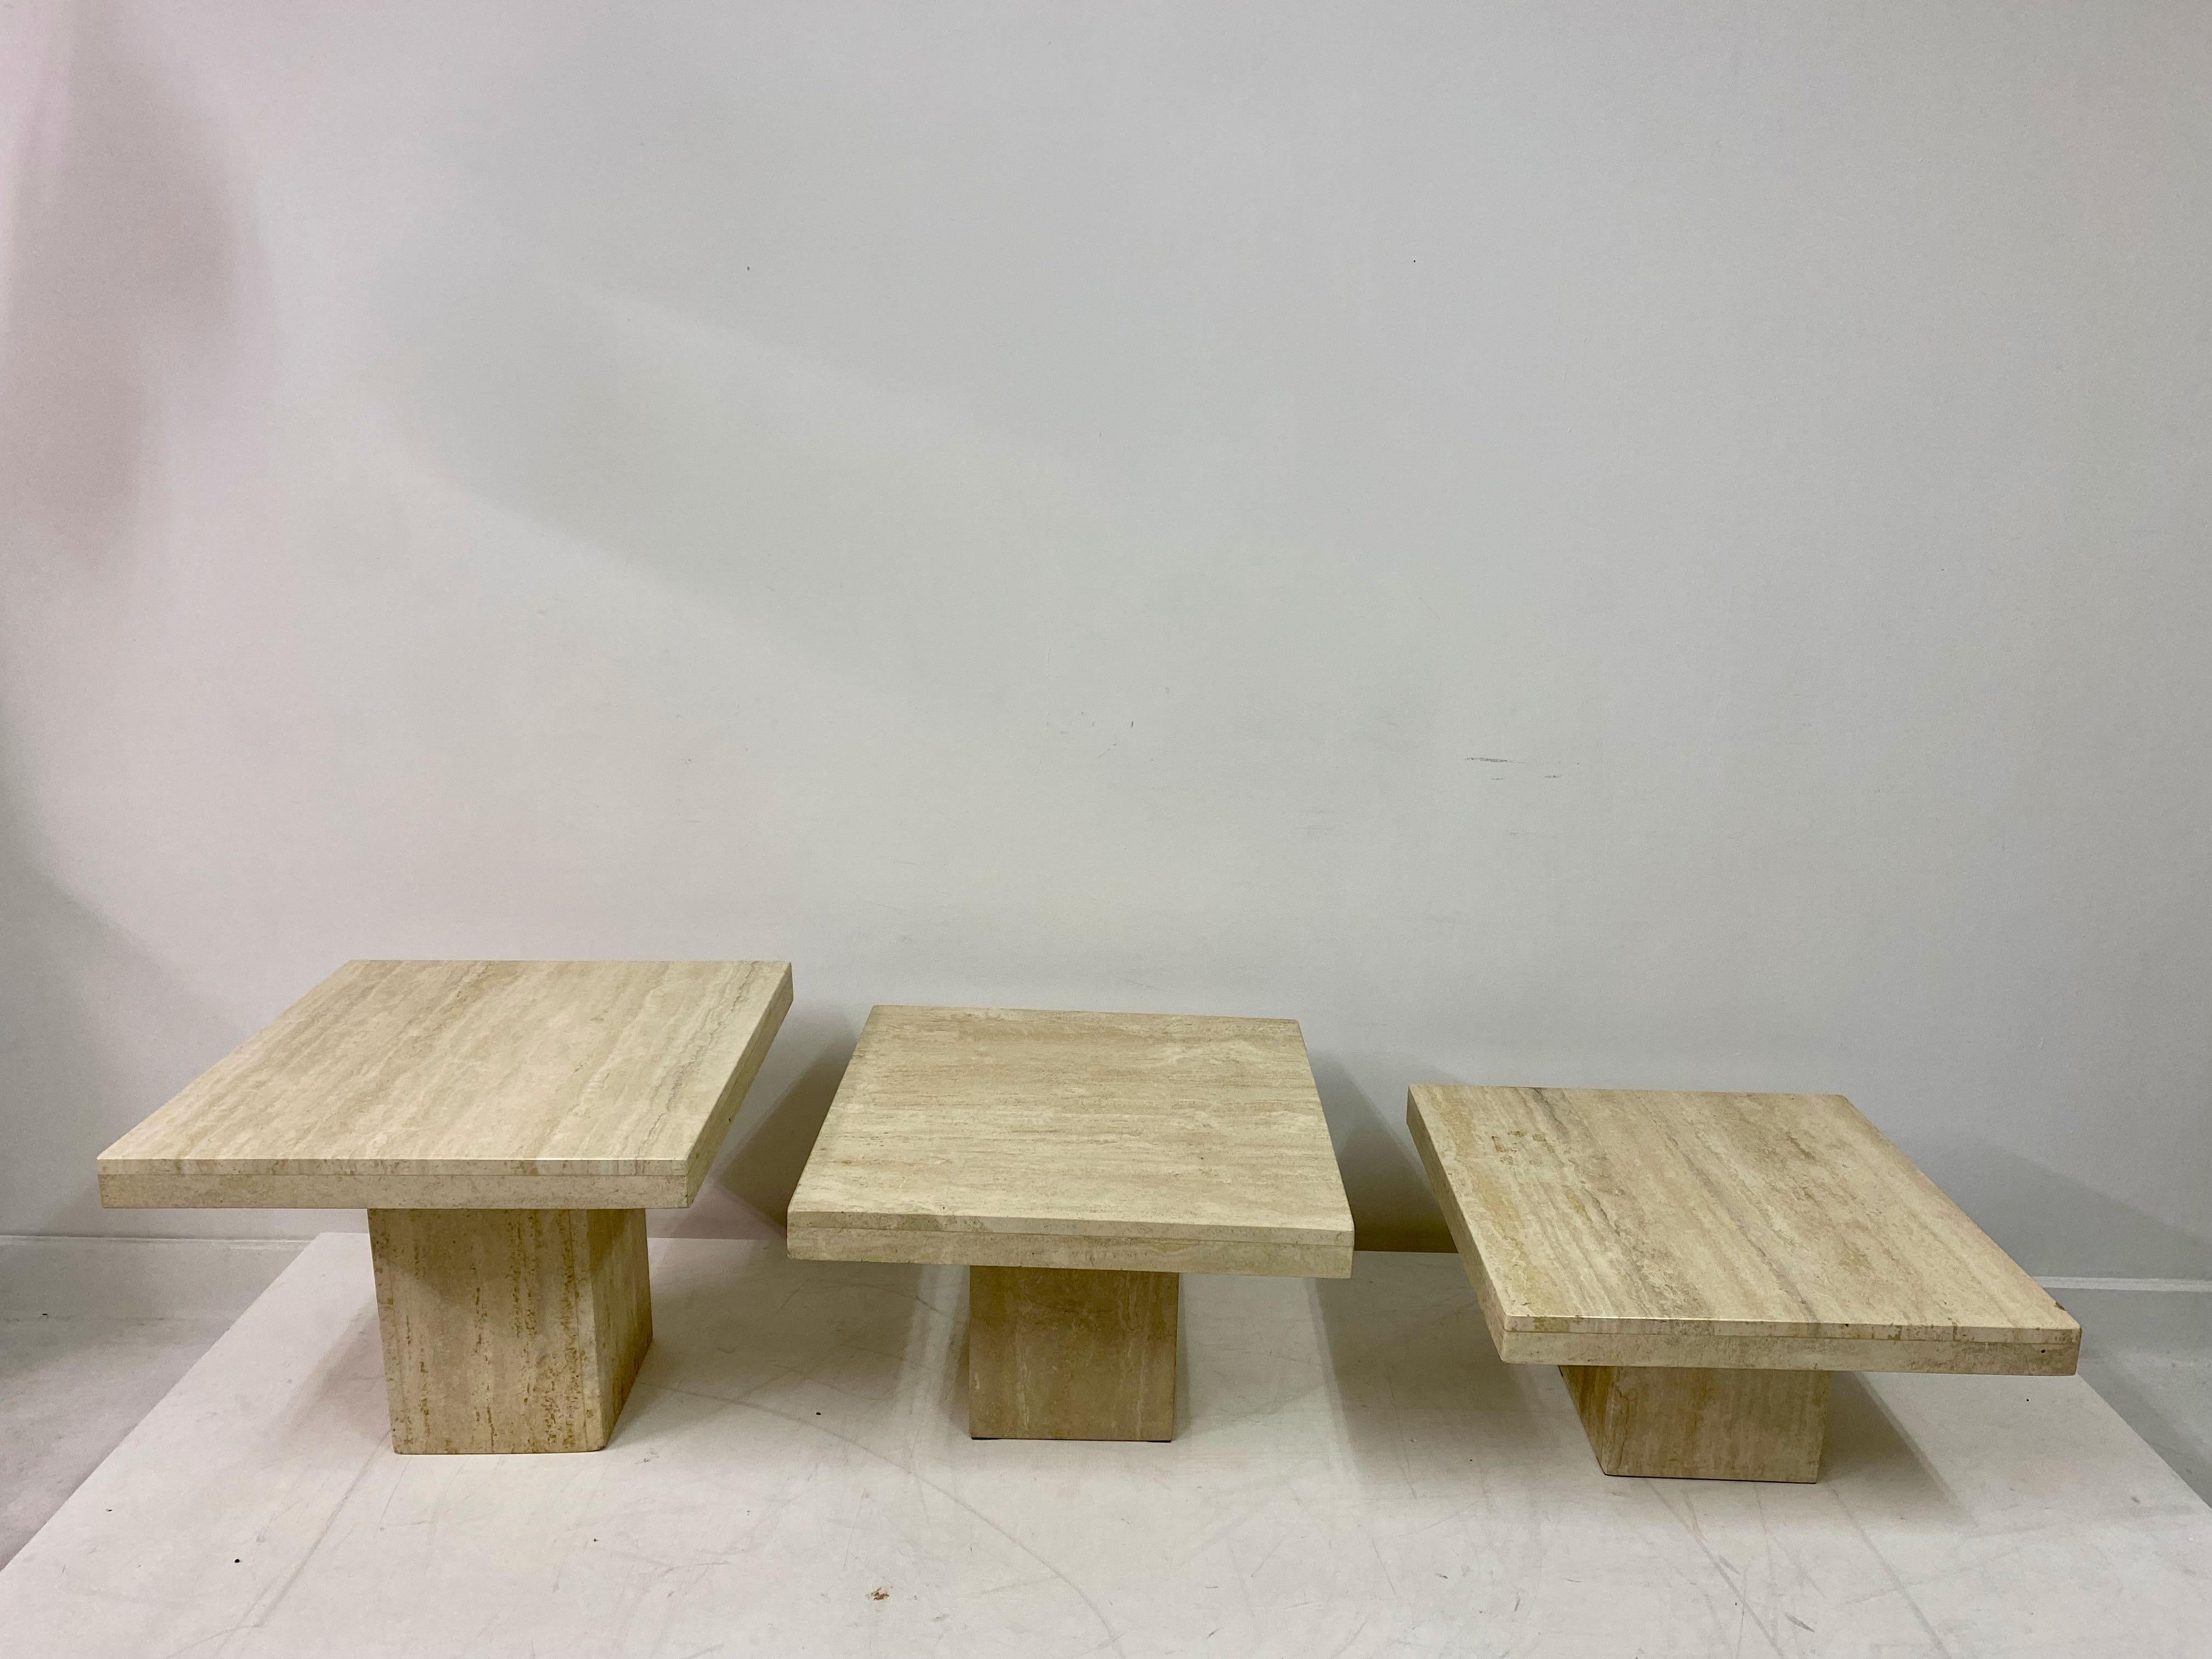 Set of three side tables

Travertine

Varying heights

Can be configured in different ways

Measures: Heights are 47cm, 39cm and 31cm

1980s Italy.